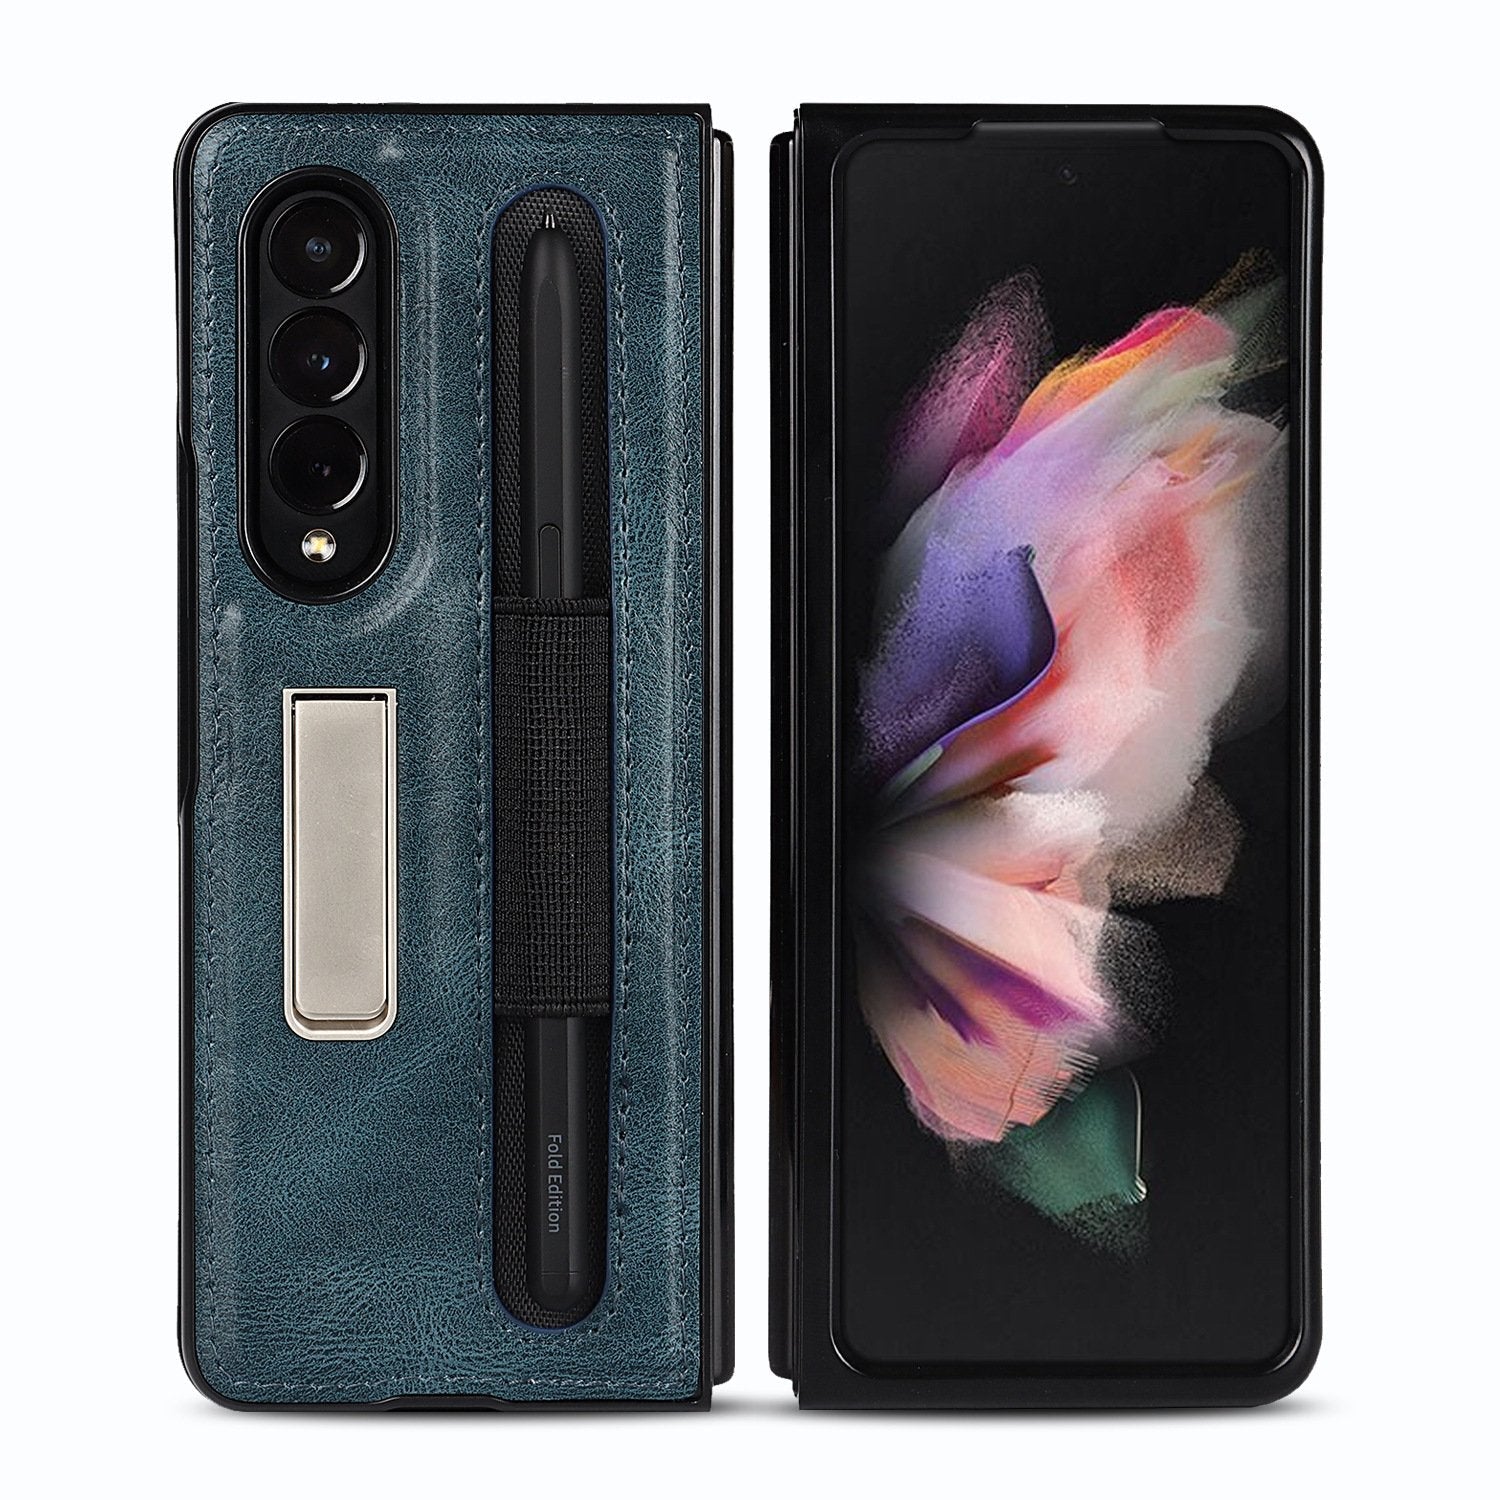 samsung z fold3 mobile phone case galaxy fold 3 5g with spen pen case holder protective coverofg4p